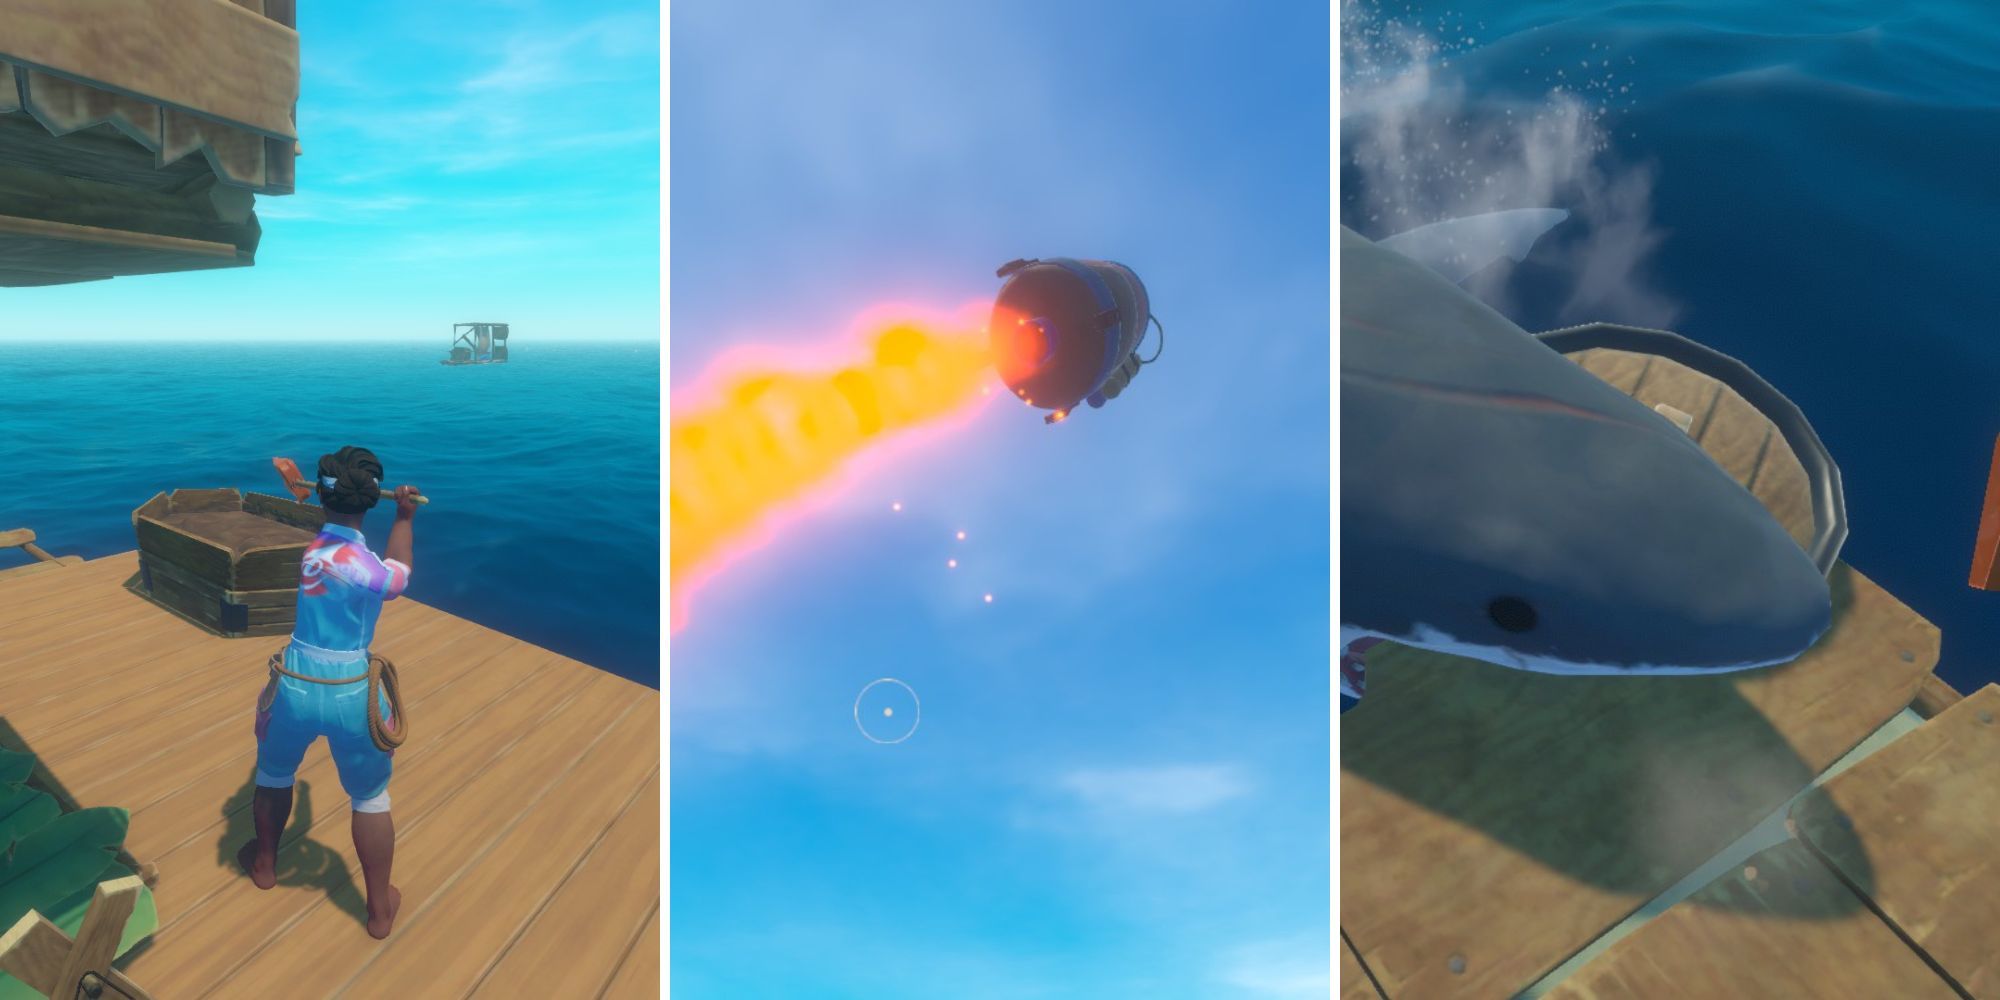 player paddles in the middle of raft, tangaroa rocket launches, shark bites the edge of raft